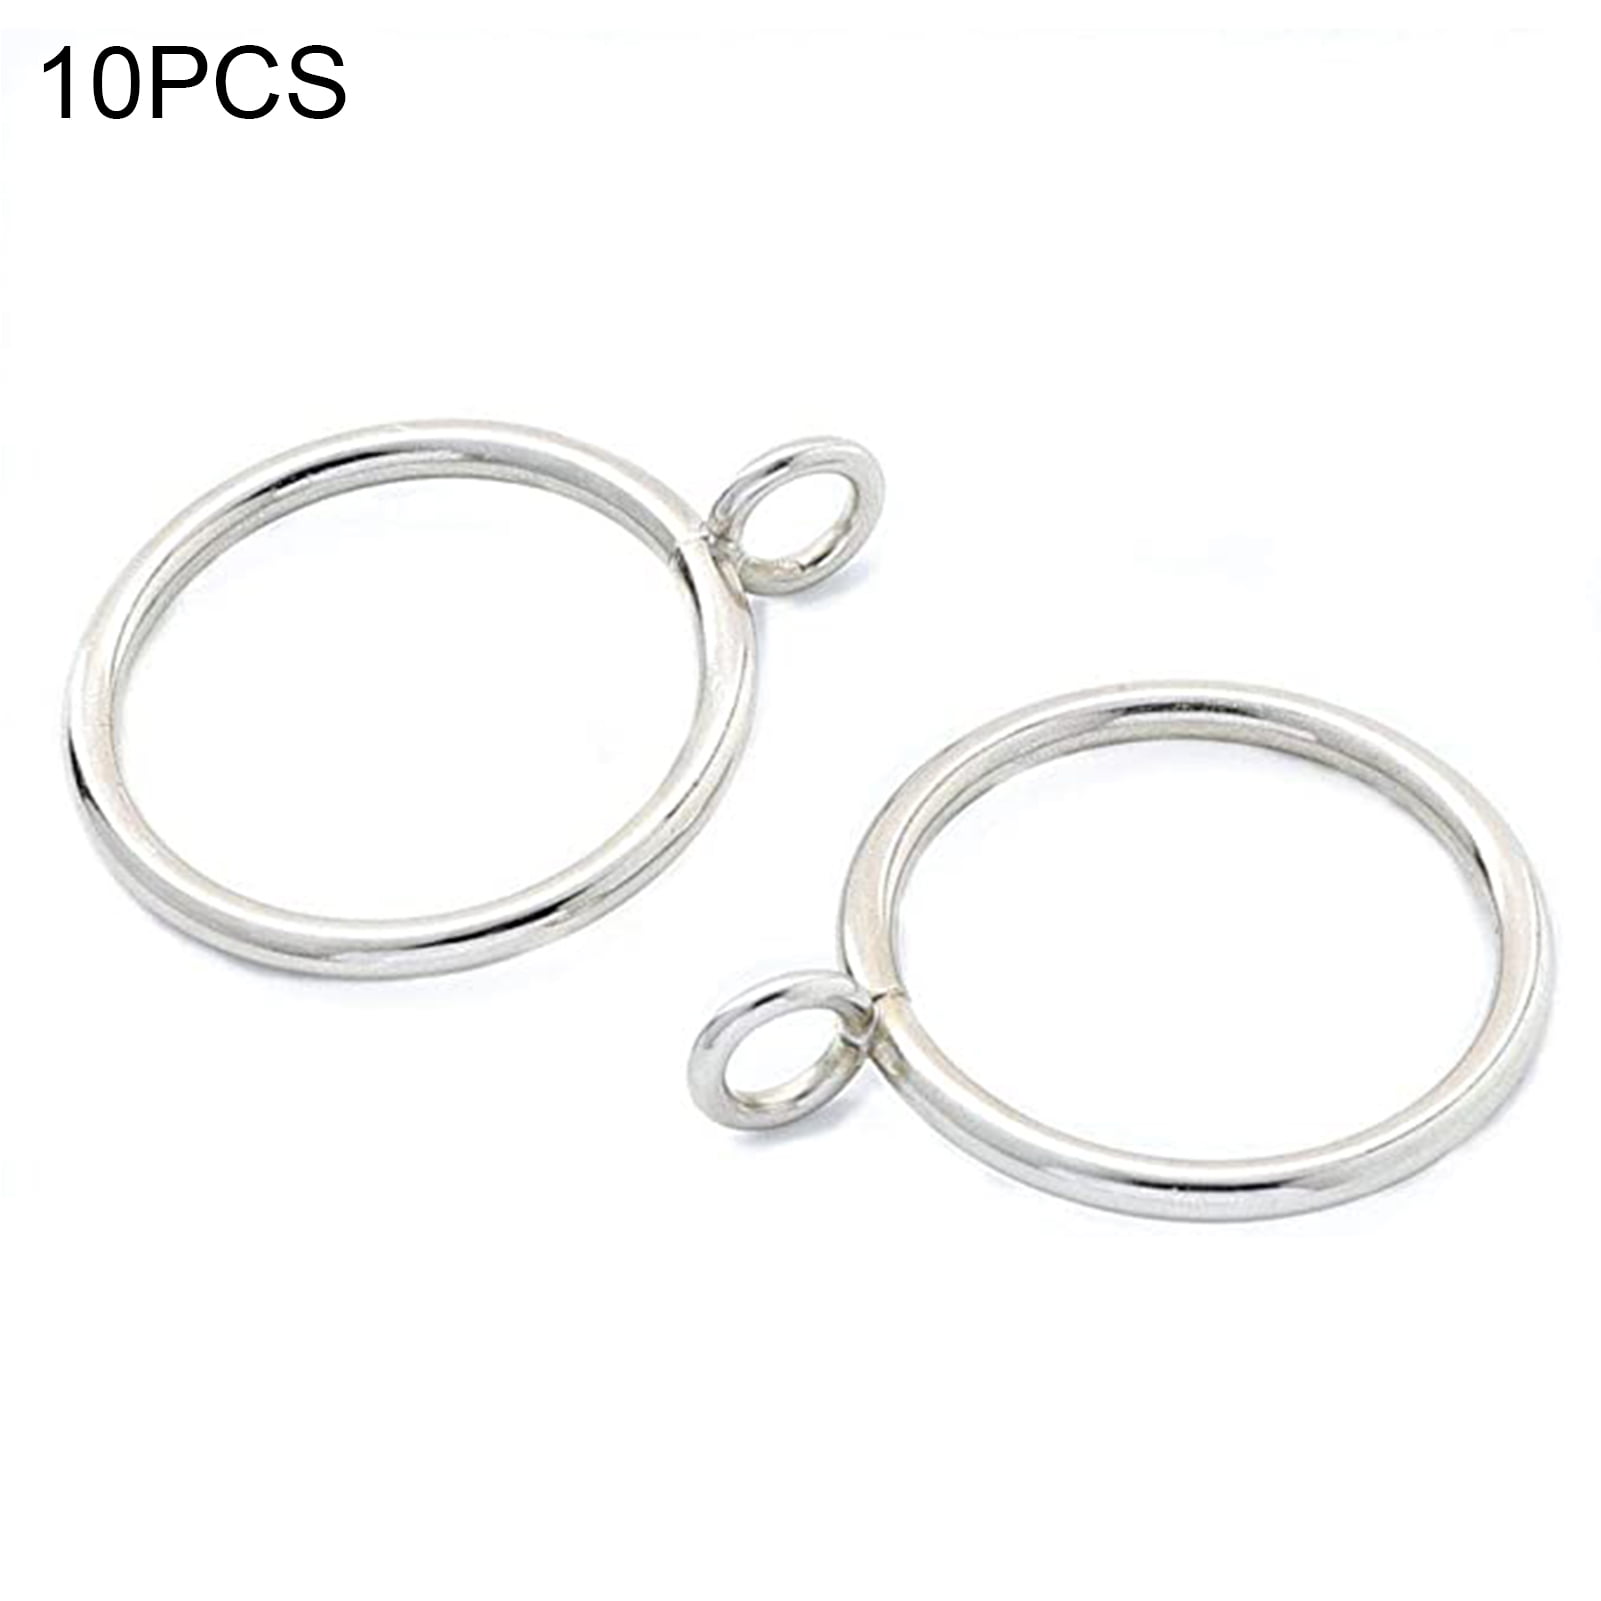 Details about   24PCS Shower Curtain Hooks Rings Stainless Steel Set of 24 Polished Rust proof 